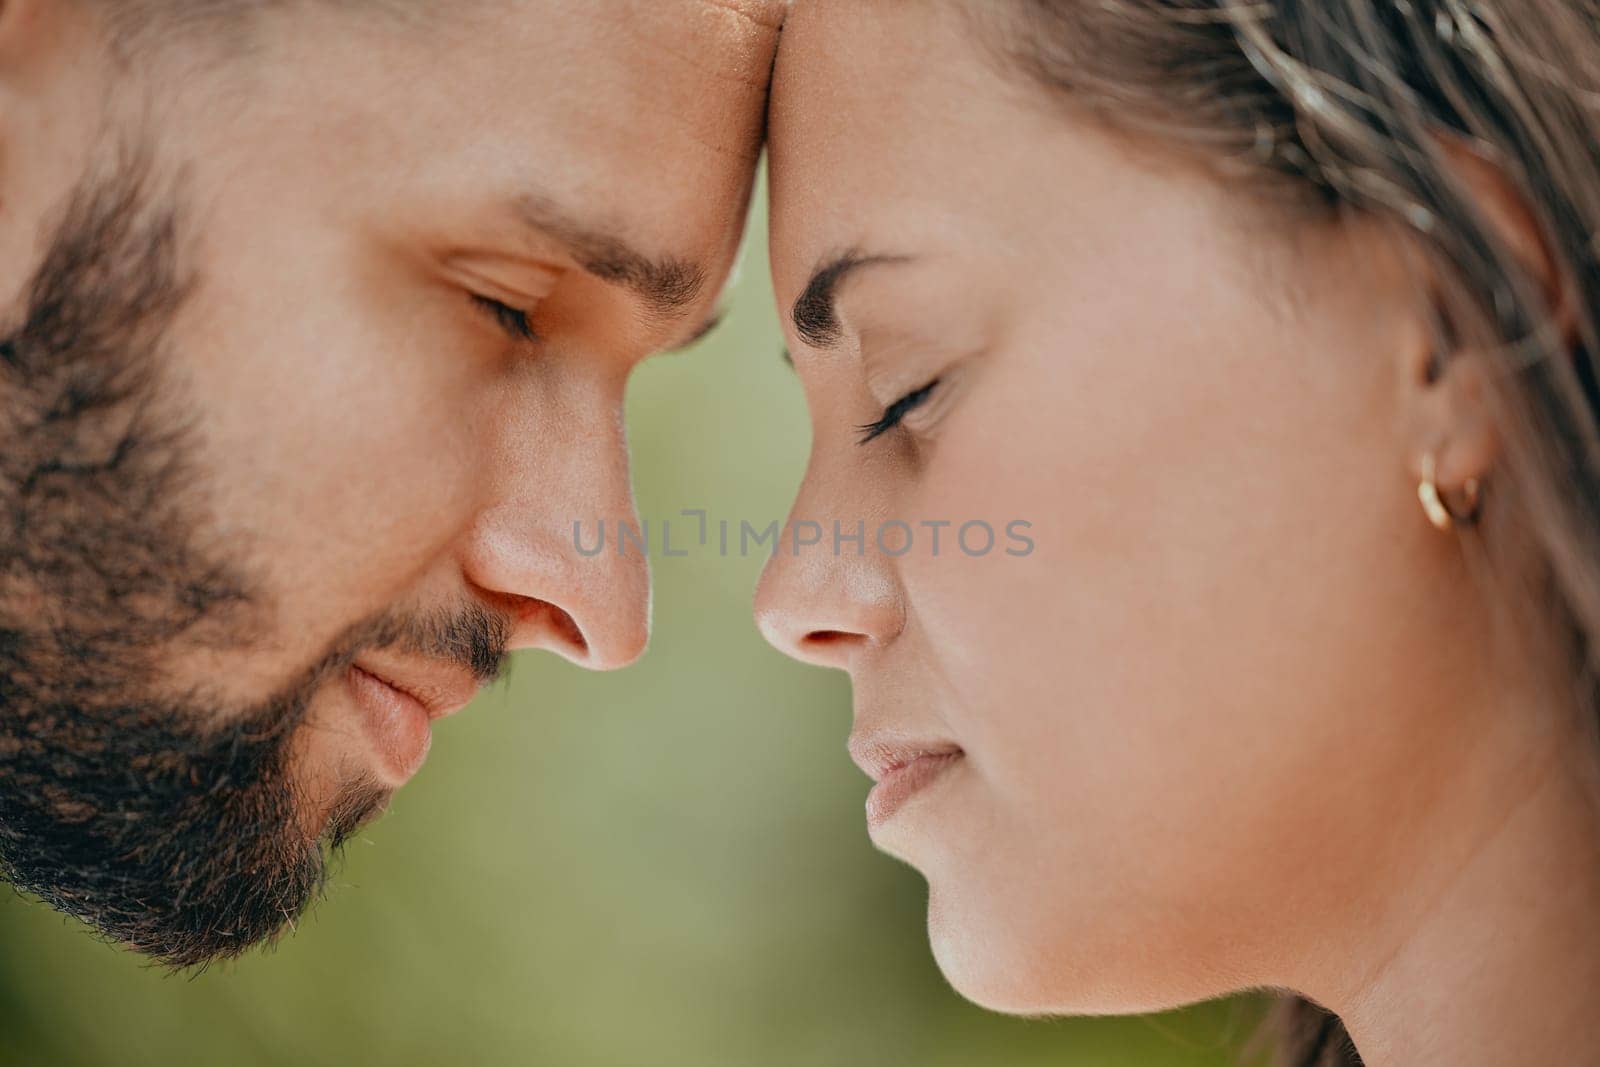 Couple, forehead and love for care, relationship or support in romance or quality bonding time together in the outdoors. Closeup of man and woman relaxing heads embracing healthy partnership outside.